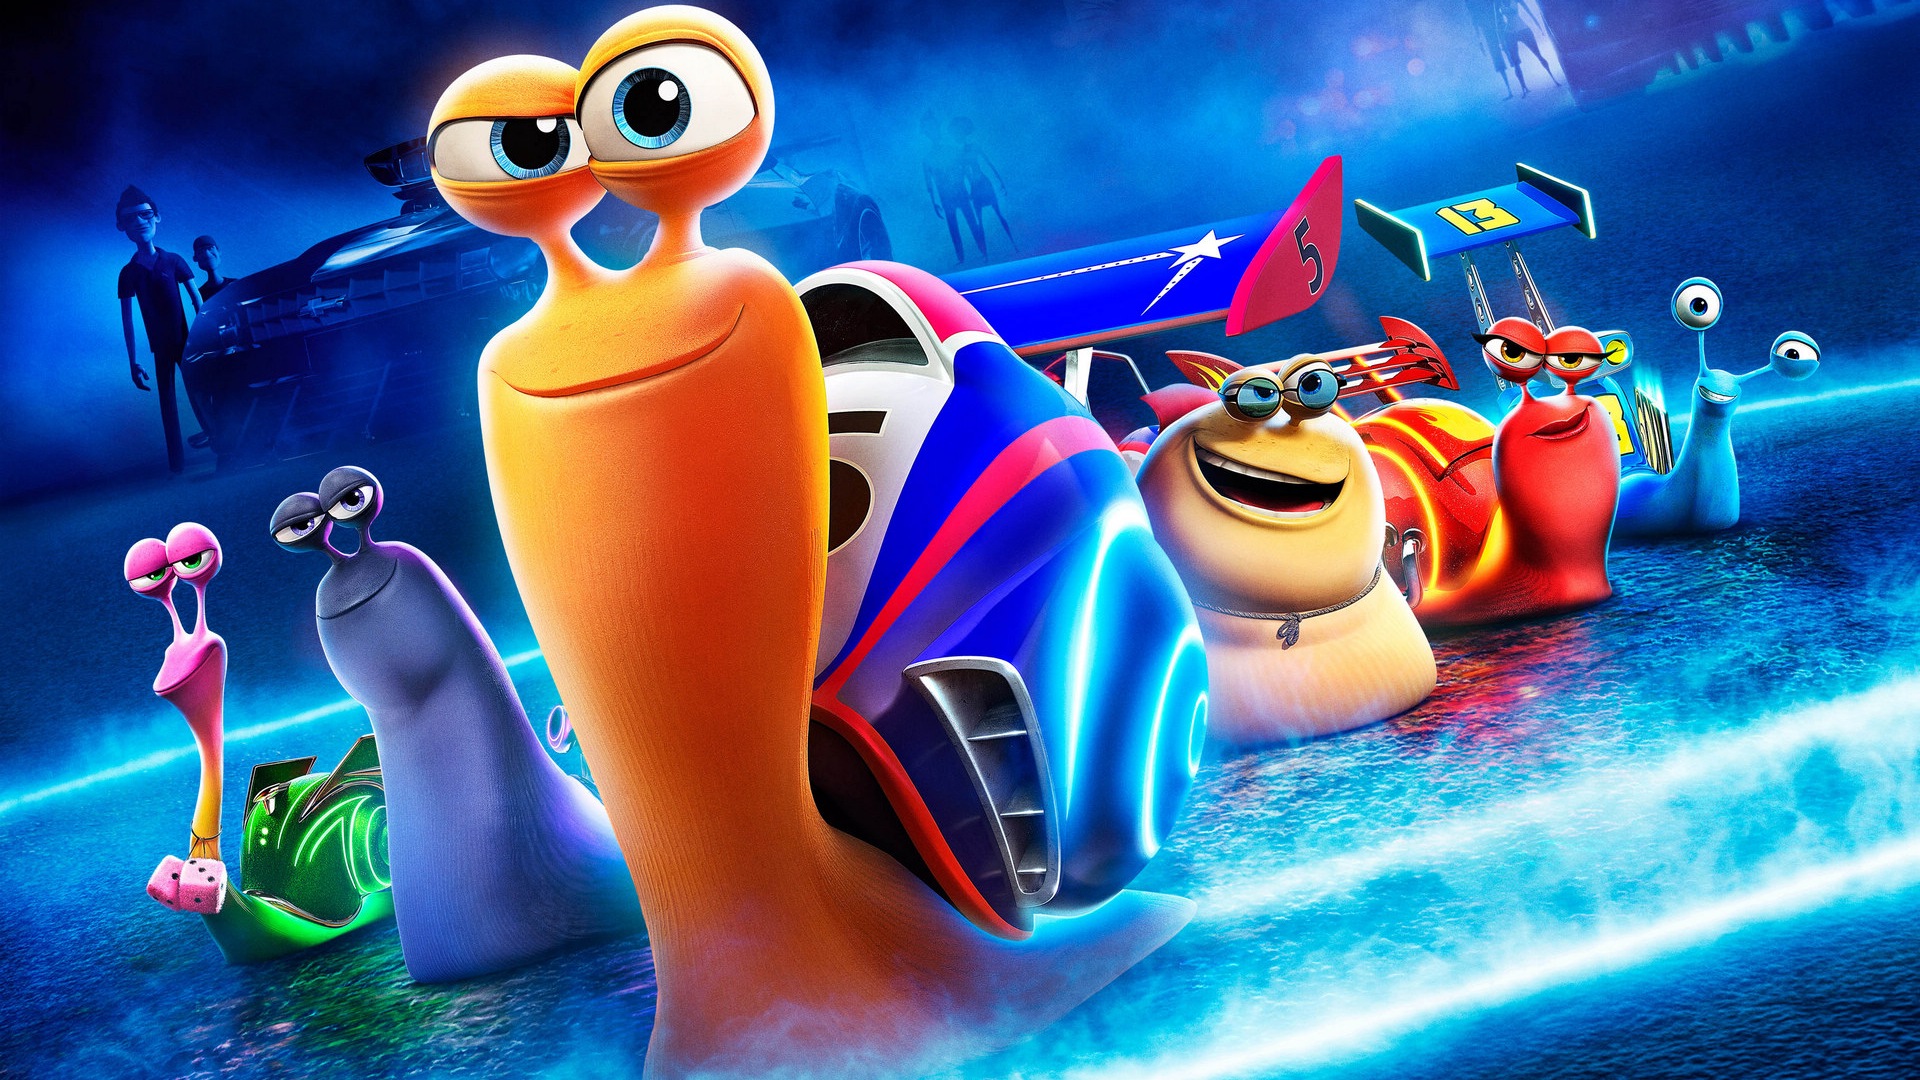 Turbo 3D movie HD wallpapers #1 - 1920x1080